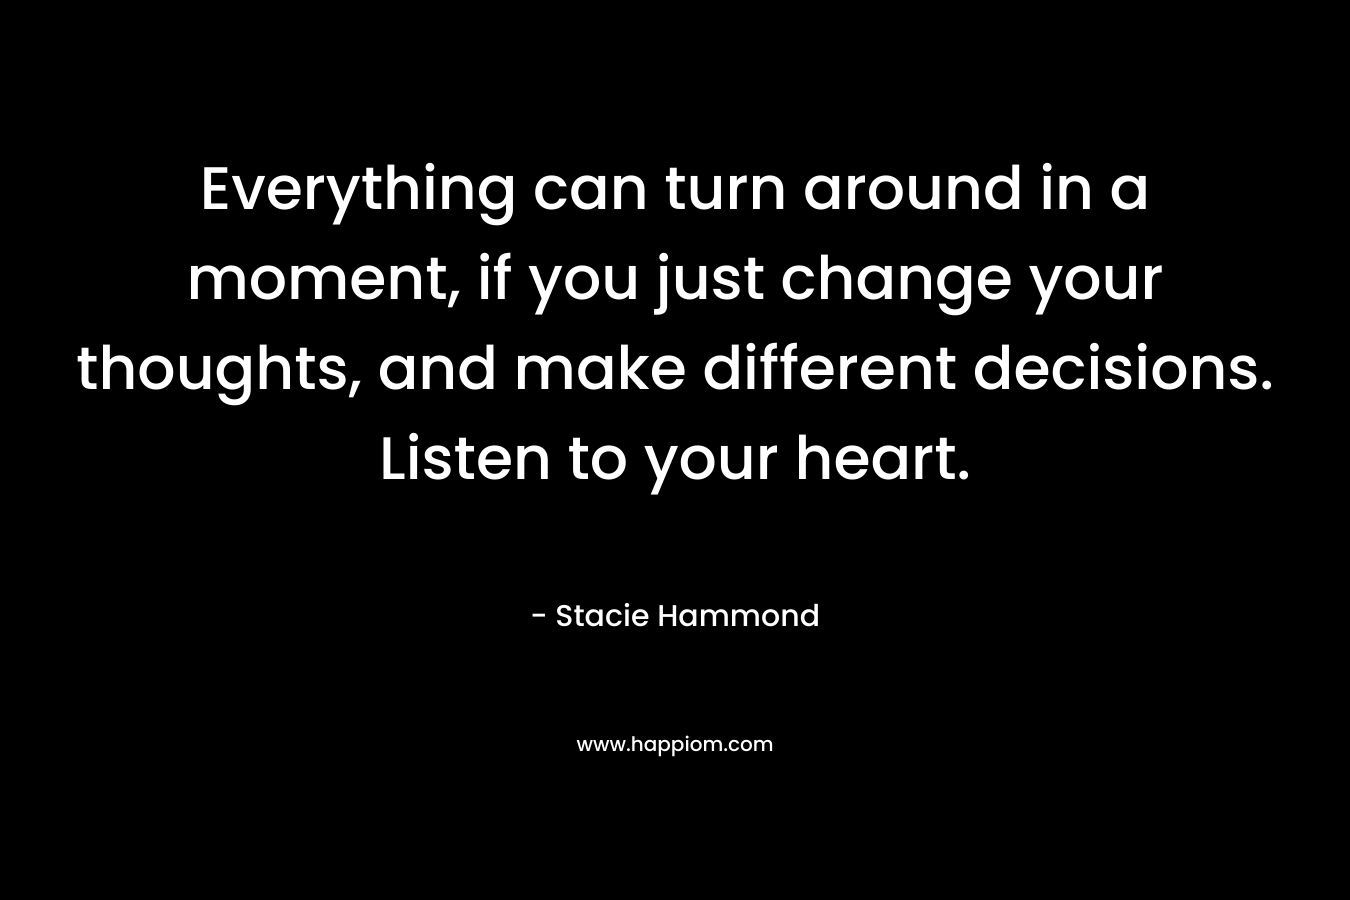 Everything can turn around in a moment, if you just change your thoughts, and make different decisions. Listen to your heart.